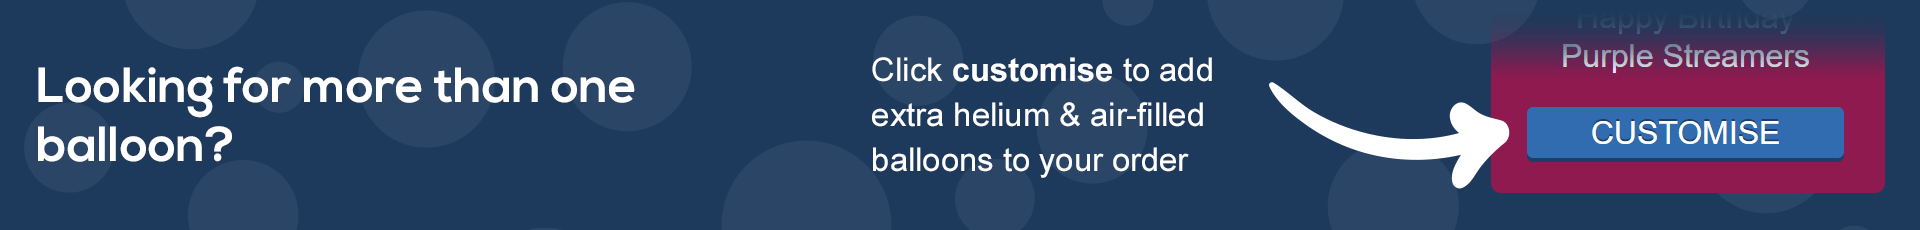 Add extra balloons